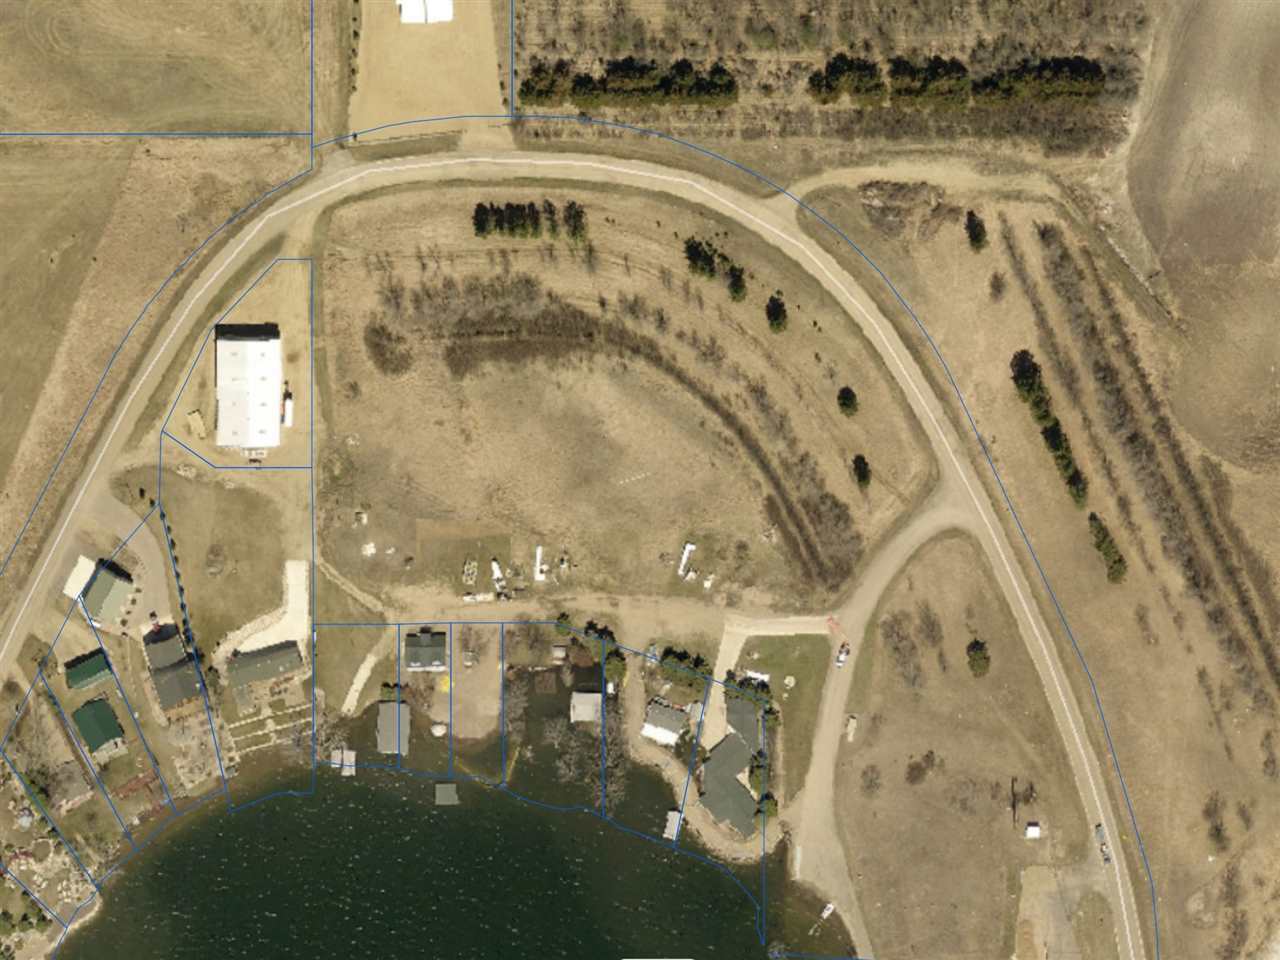 Property Photo:  *Unassigned Lot 1, Block 1, Rice Lake Park 3rd Addition  ND 58779 